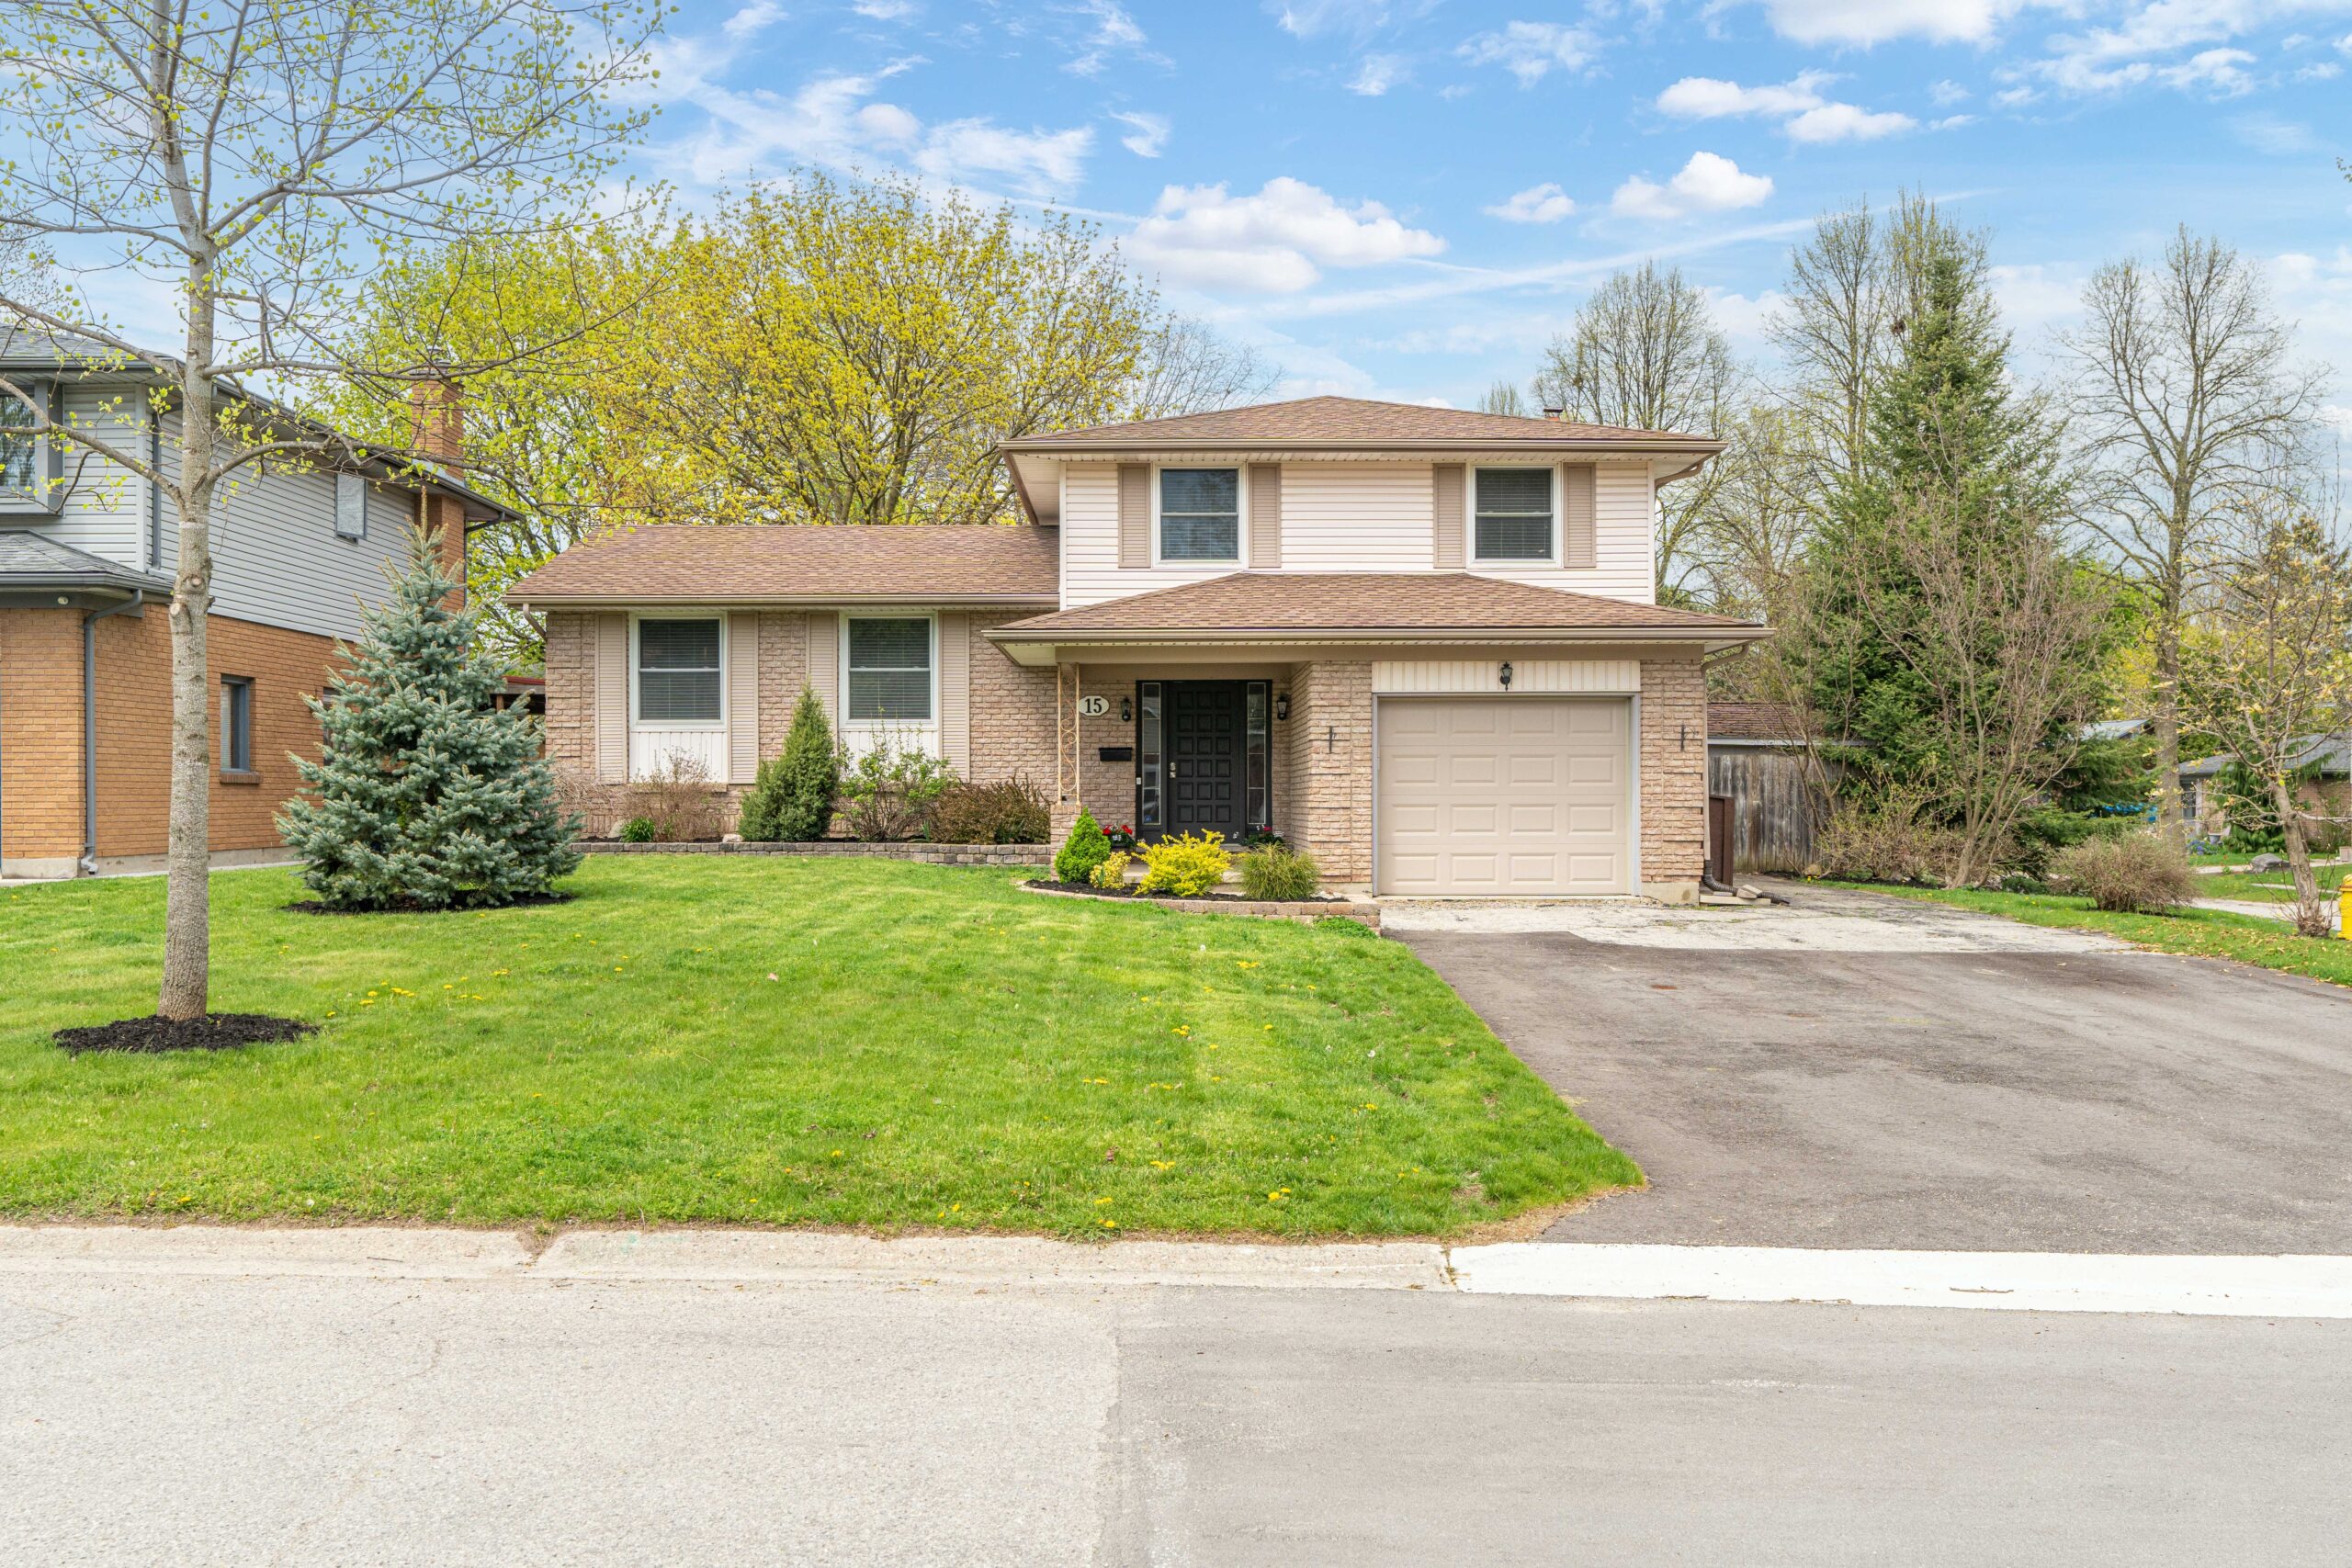 SOLD!! – 15 Chateau Court, London Ontario N6K 2C1